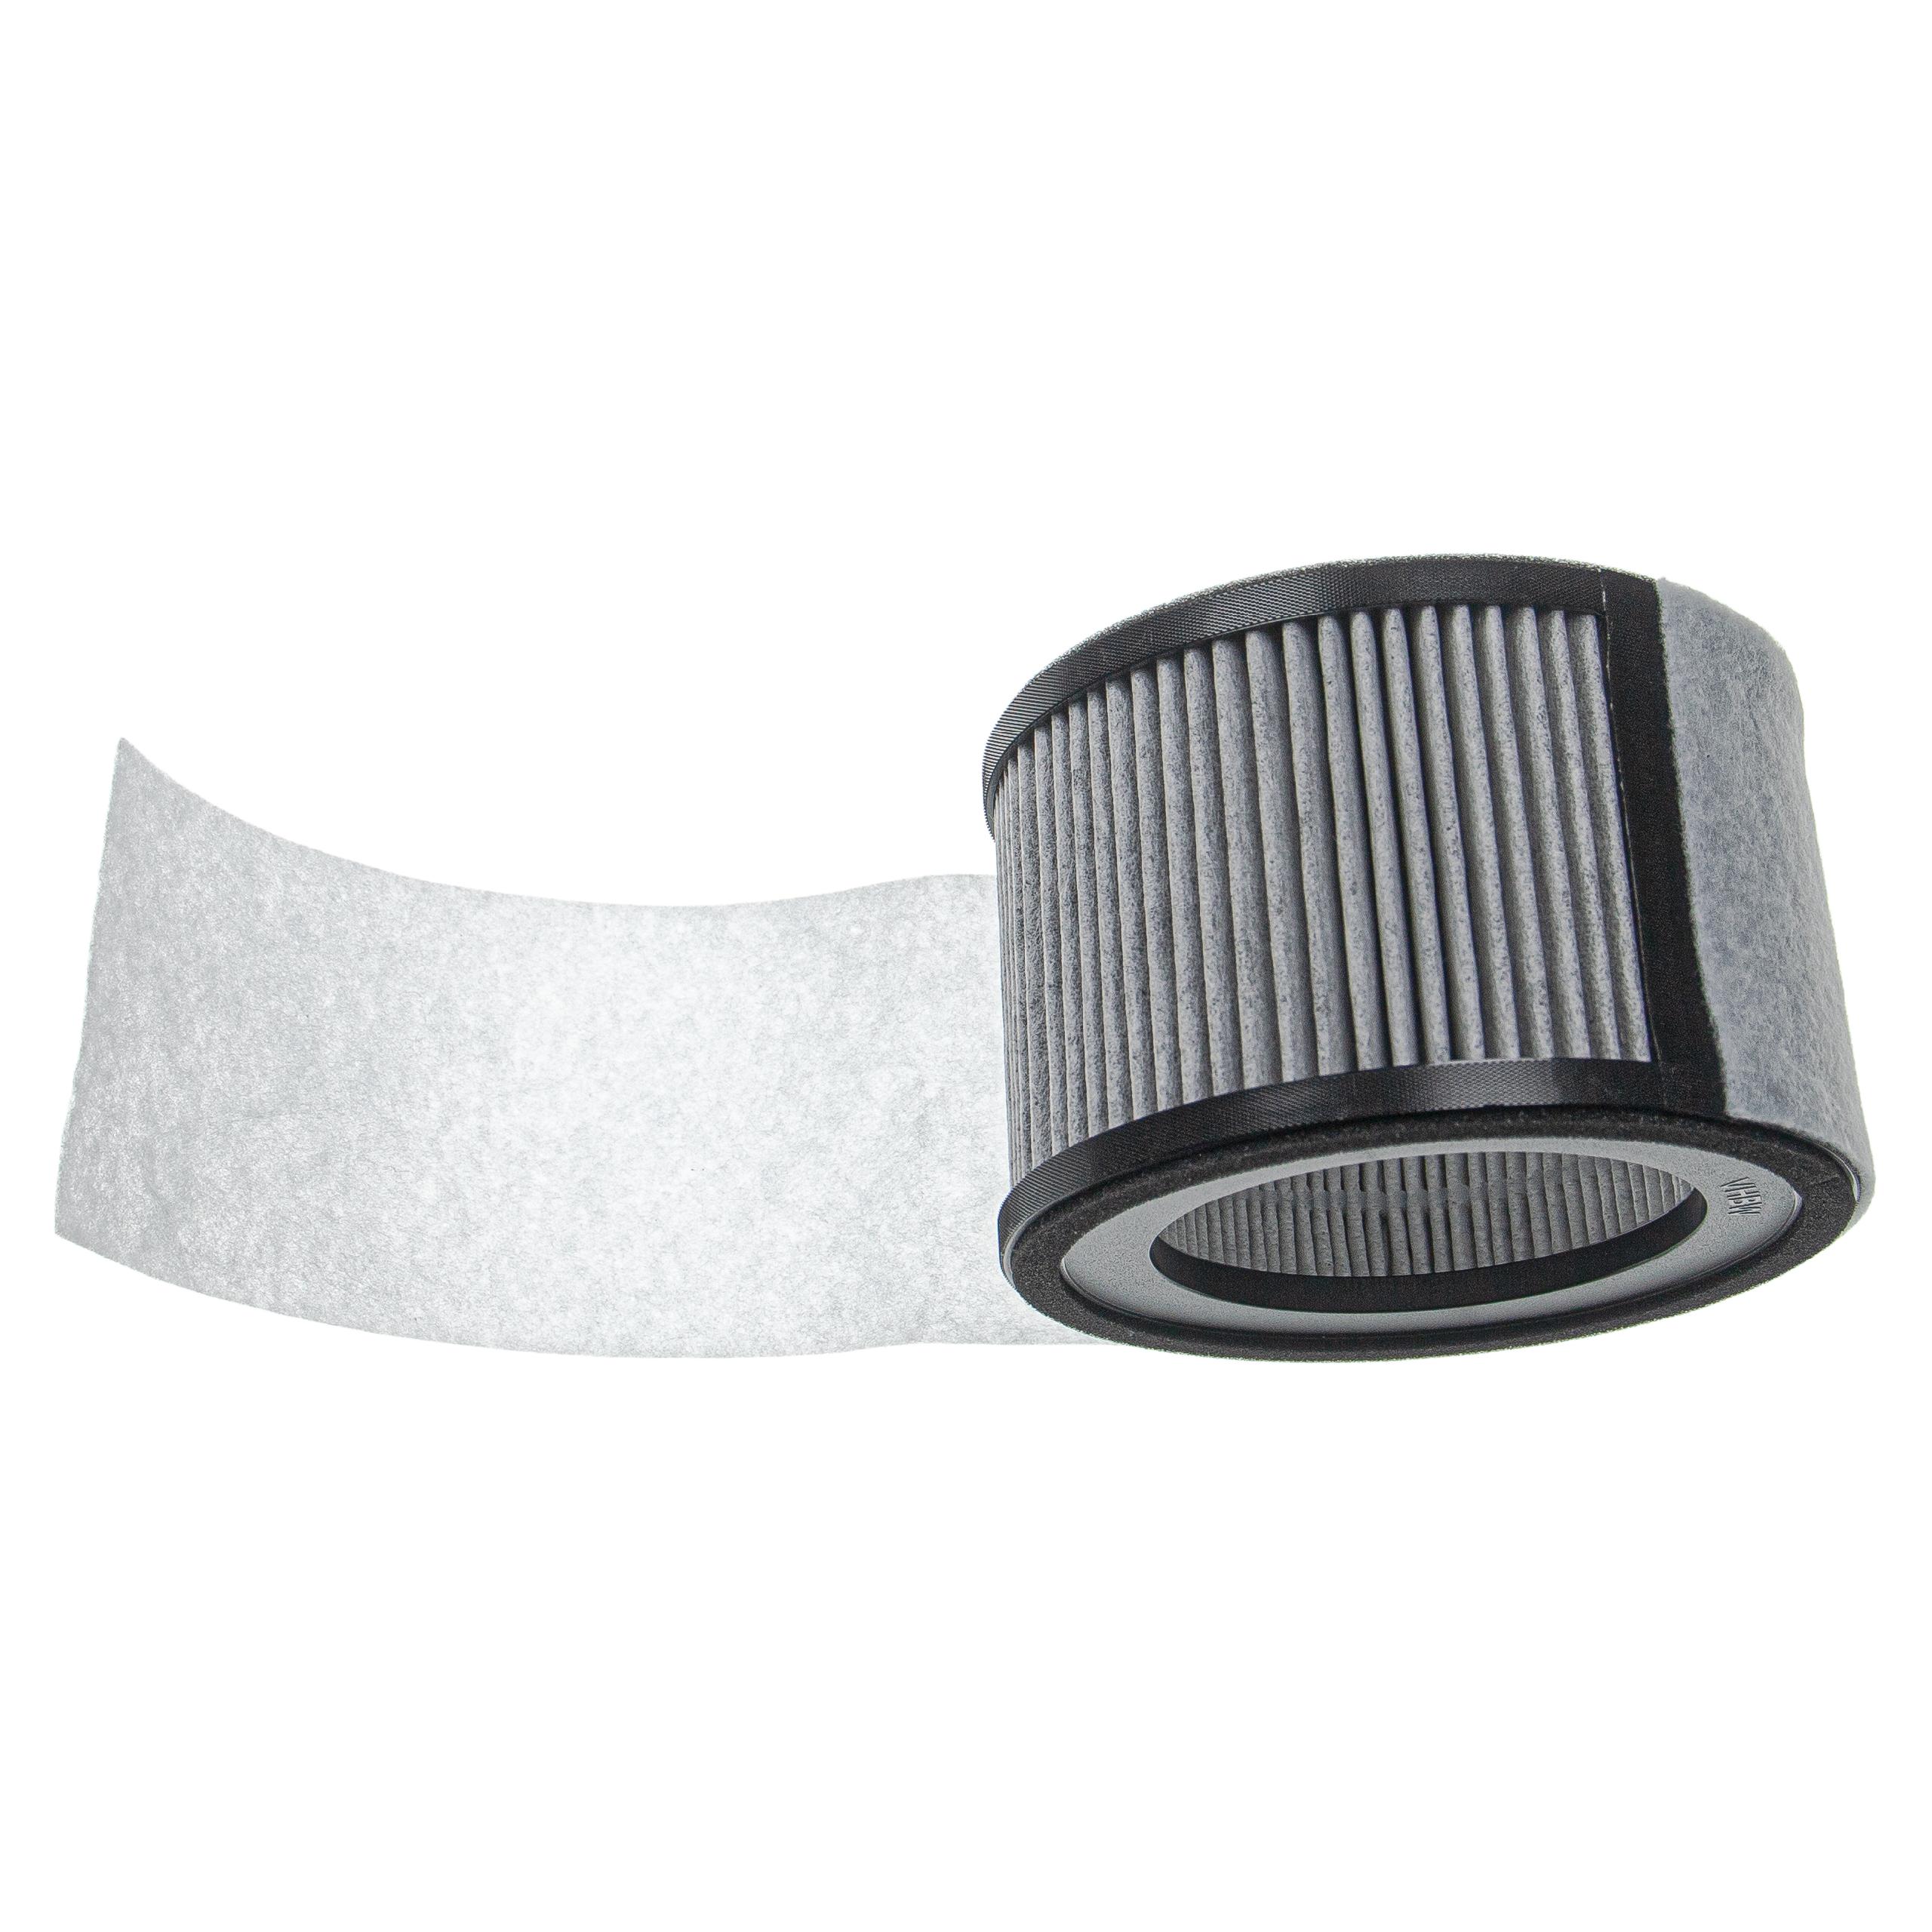 Filter replaces Leifheit / Soehnle 68129, 68106 for Air Purifier